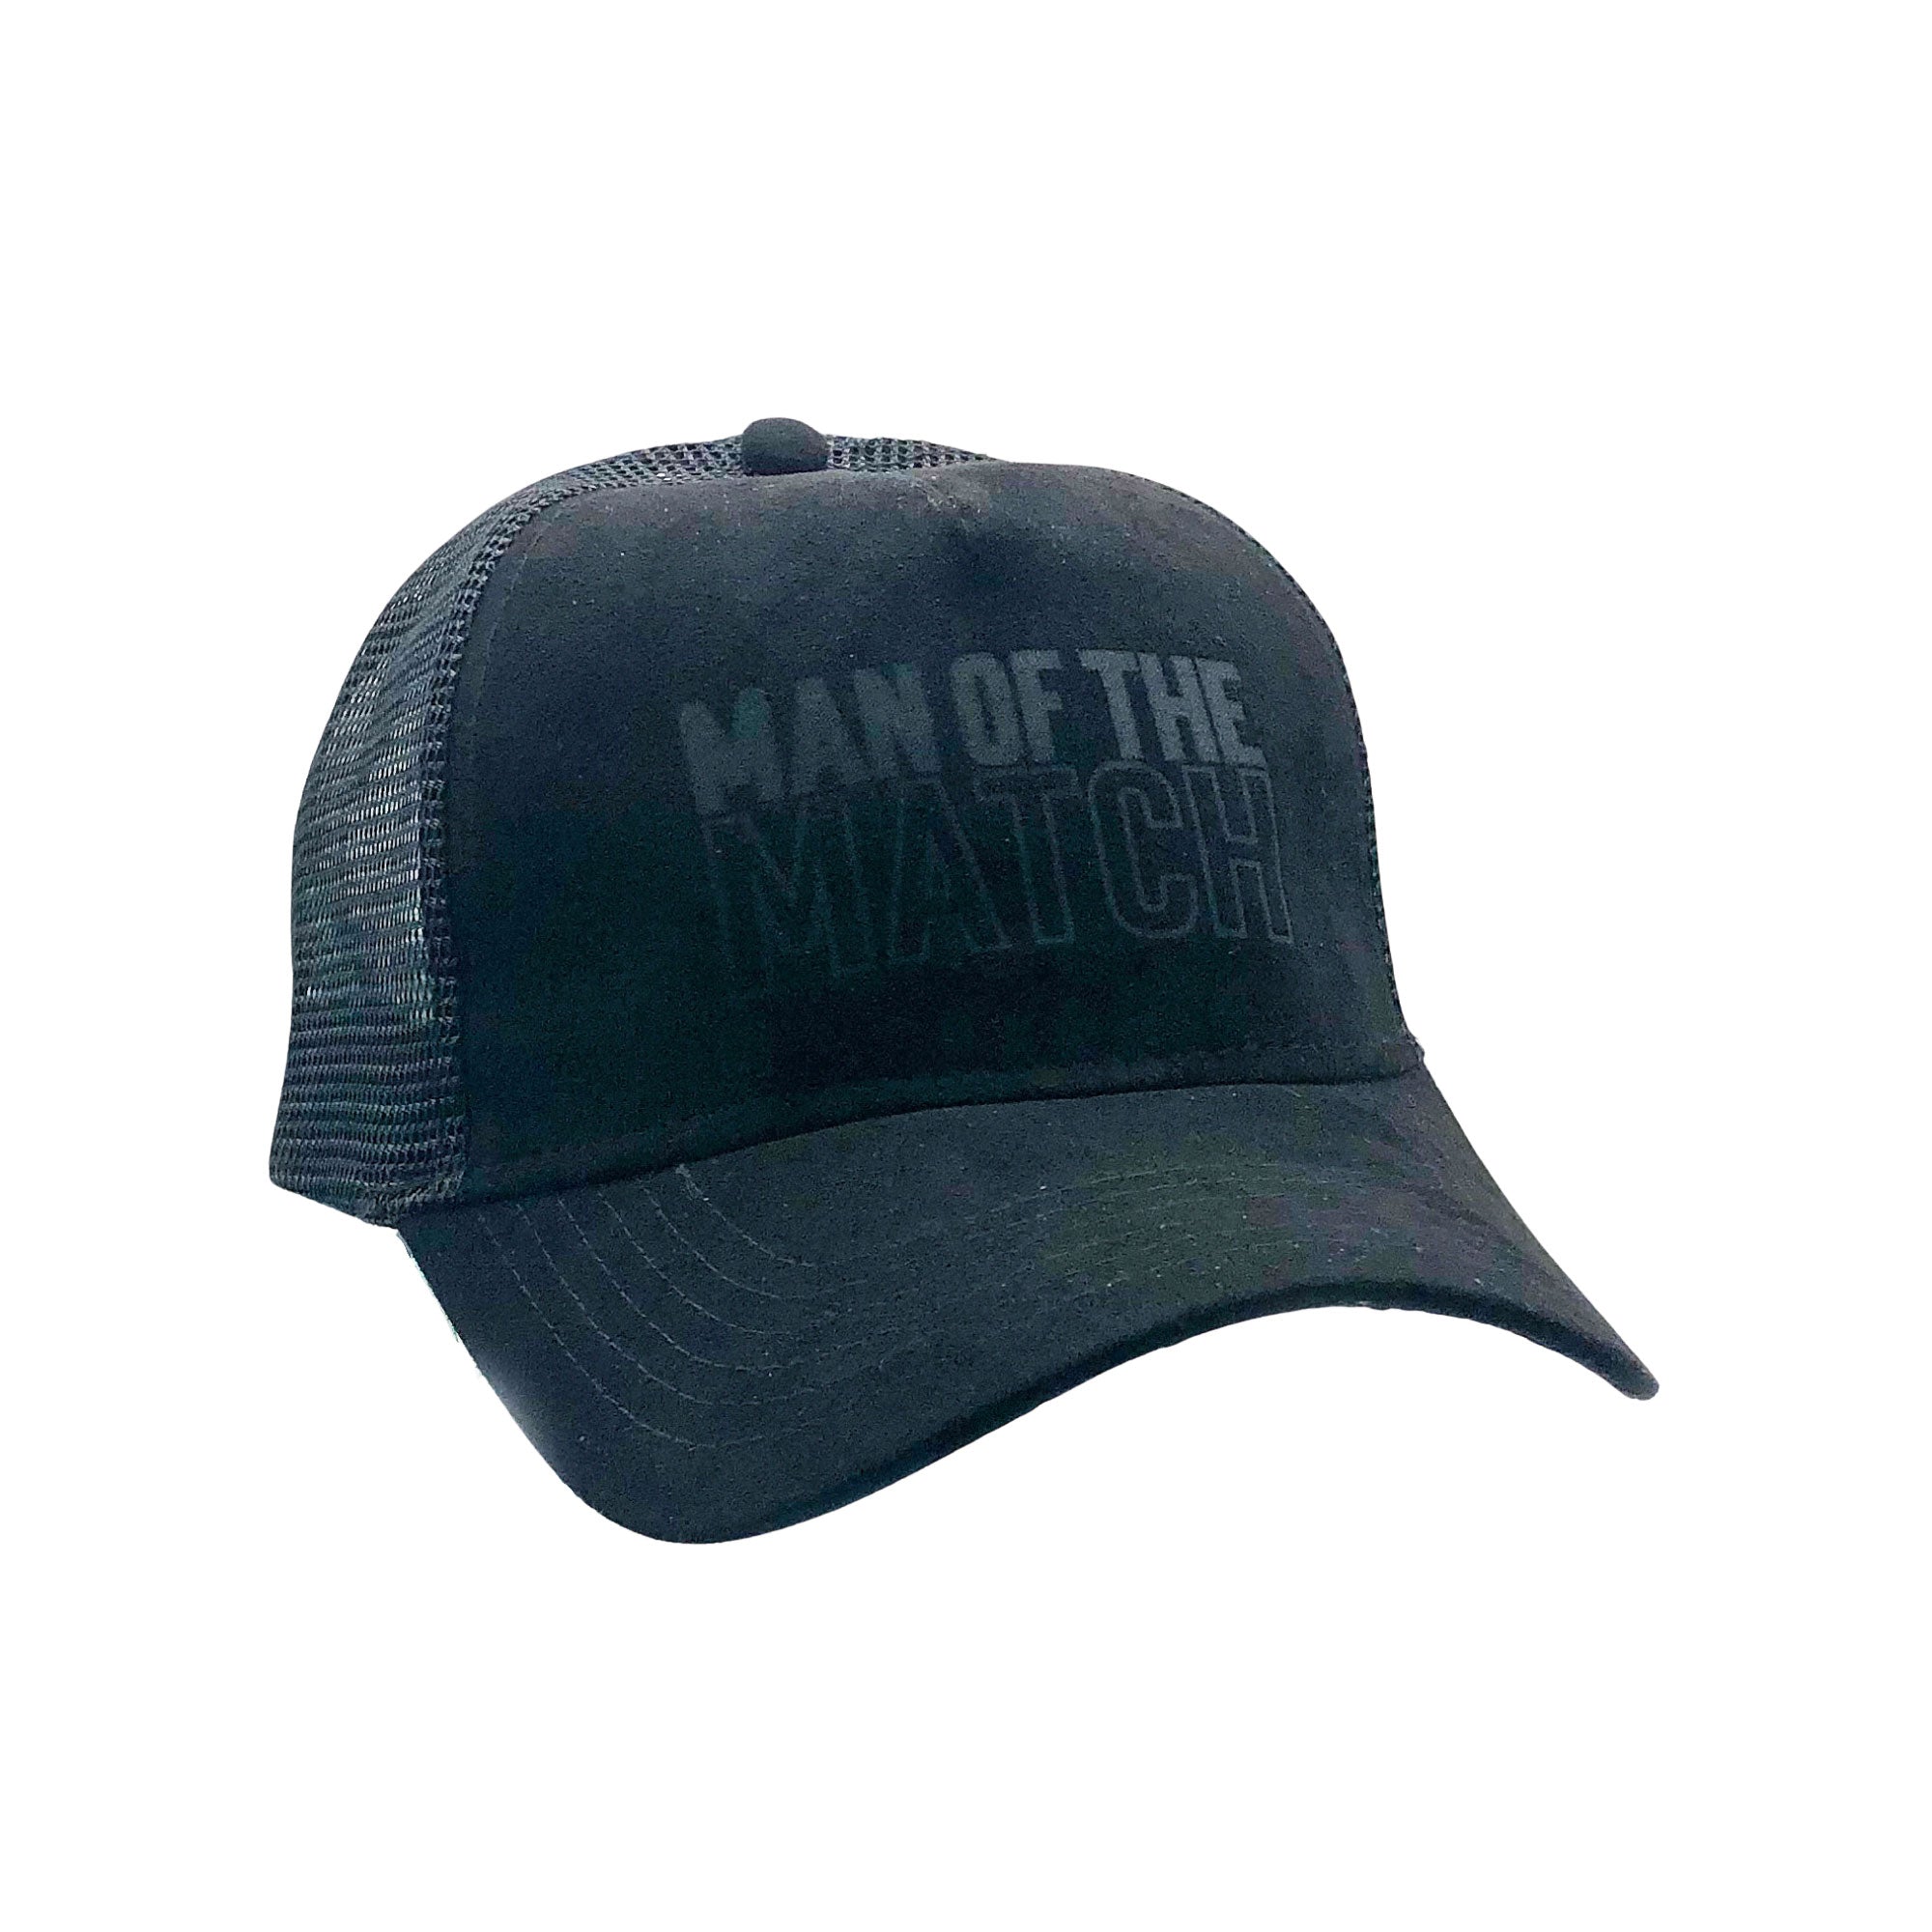 MAN OF THE MATCH® Official Cap - Laser Branded Black Suede